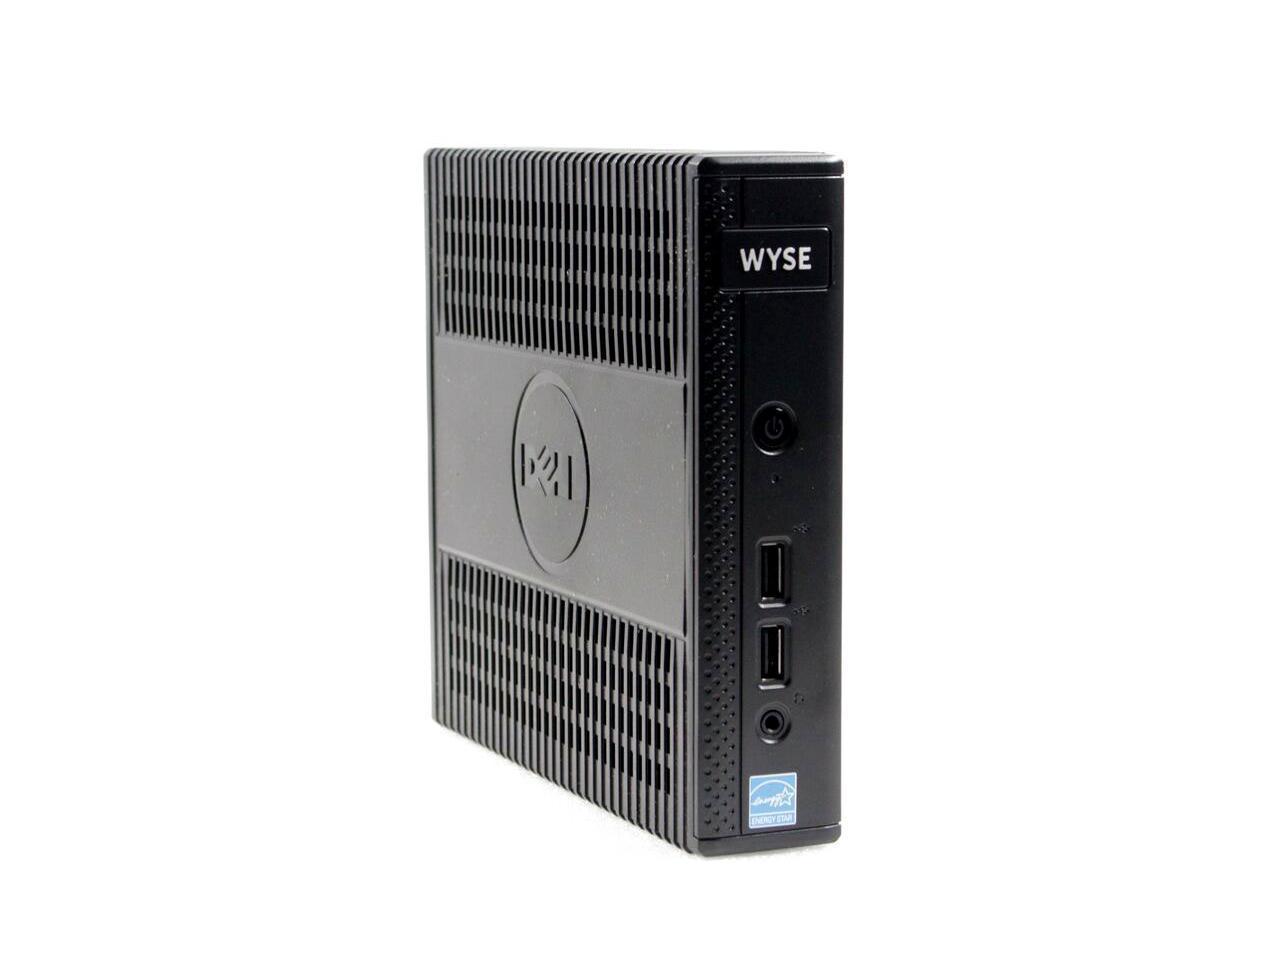 Dell Wyse Dx0D 5010 Thin Client AMD G-T48E Dual-core 1.40 GHz 